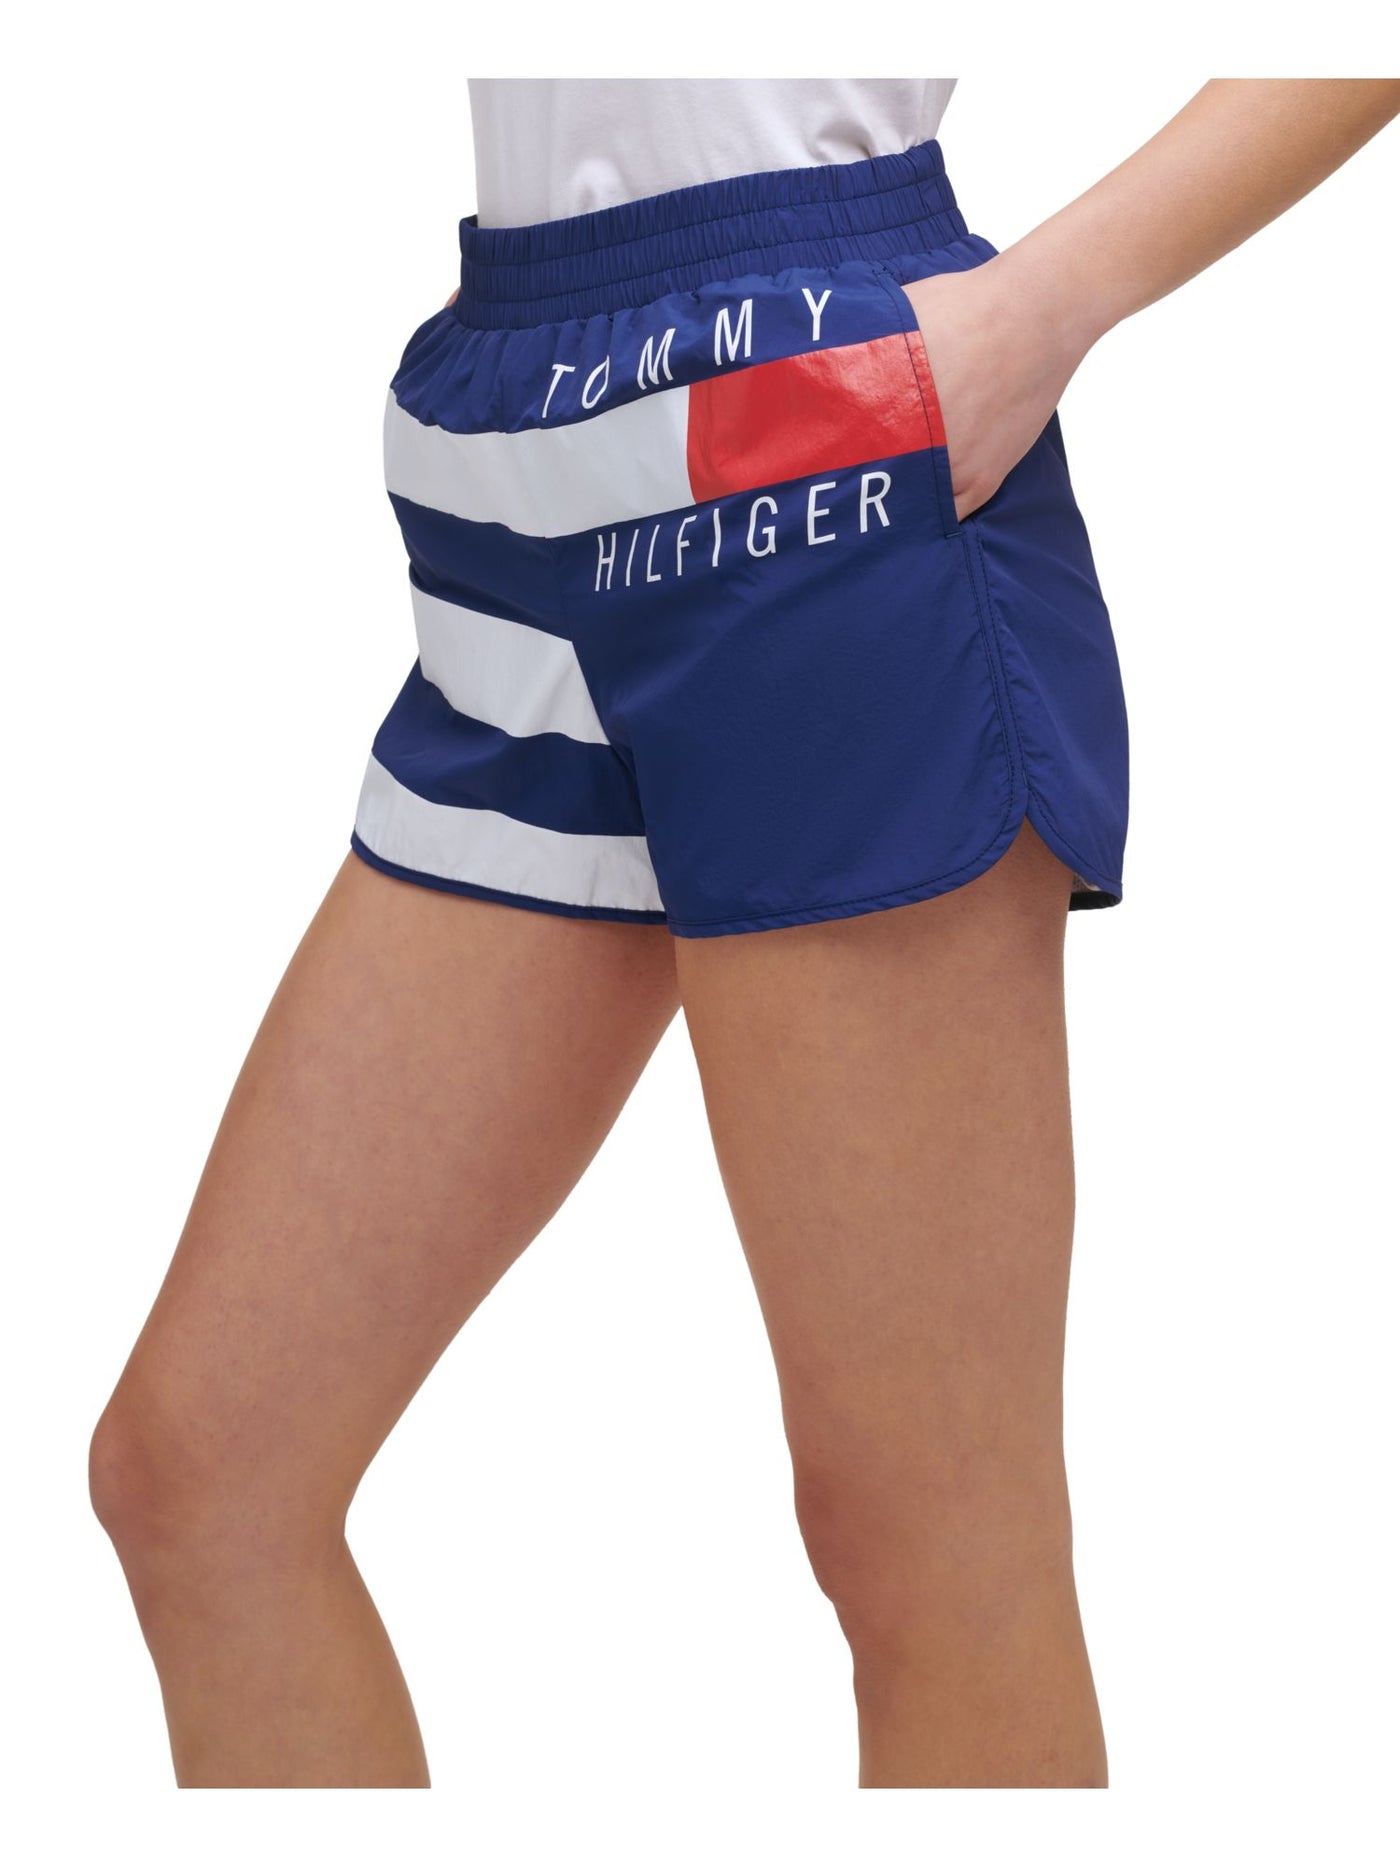 TOMMY HILFIGER SPORT Womens Blue Striped Active Wear Shorts XS